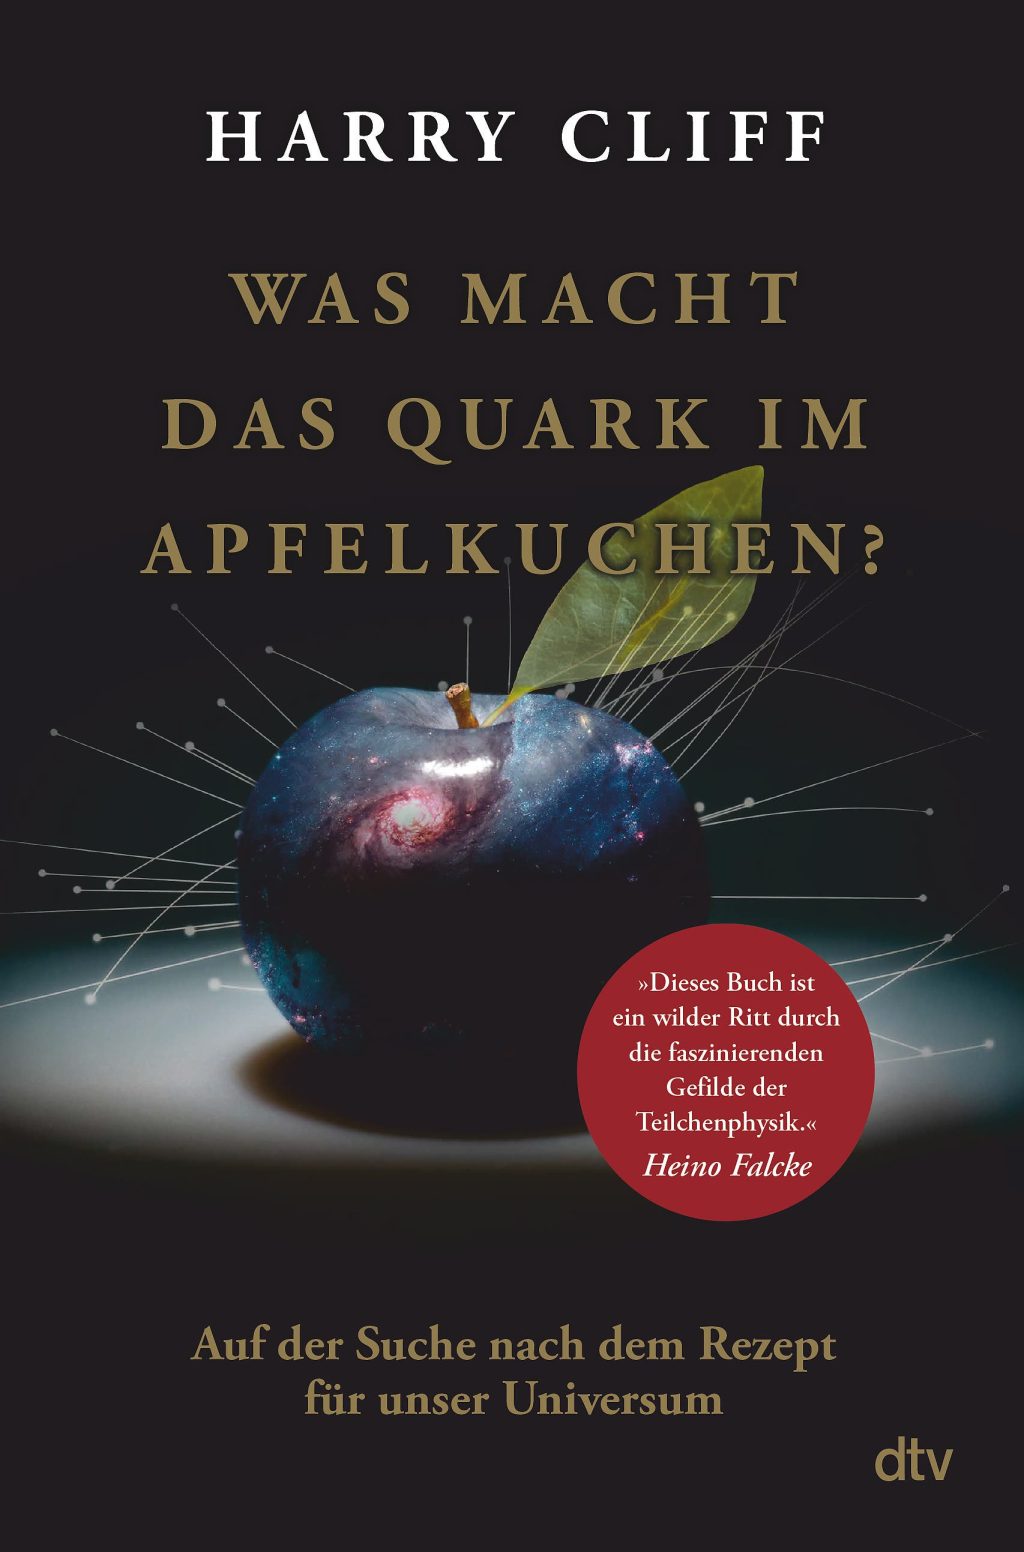 Book review "What does that quark do in apple pie?"